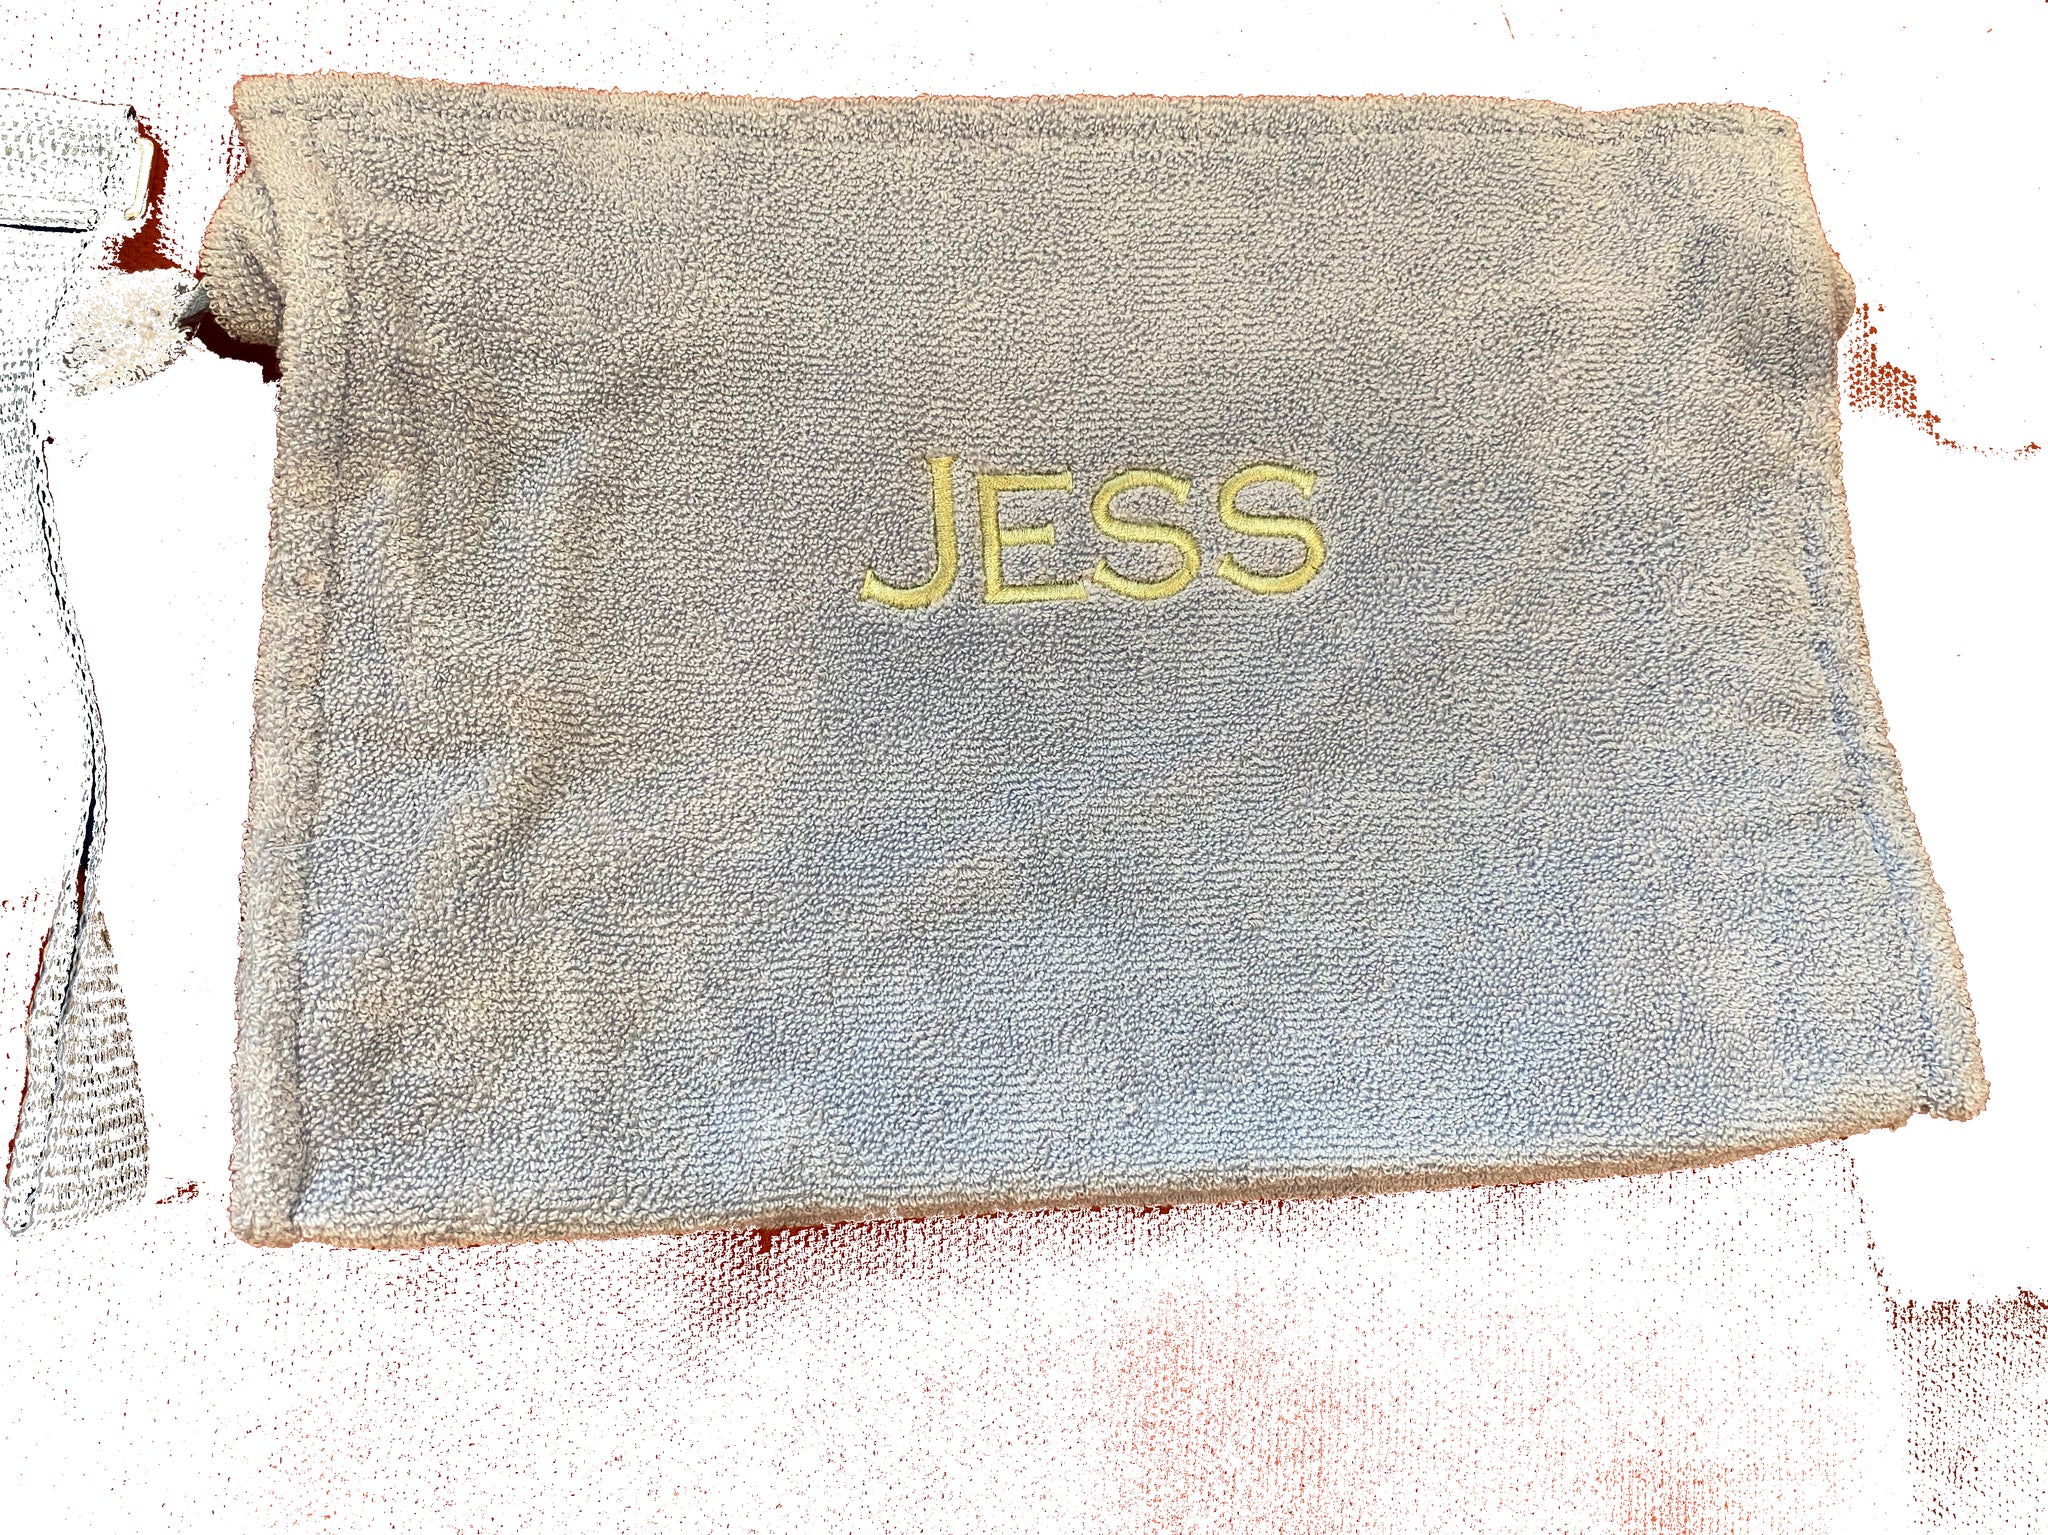 TERRY COSMETIC BAG – The Monogram Shop